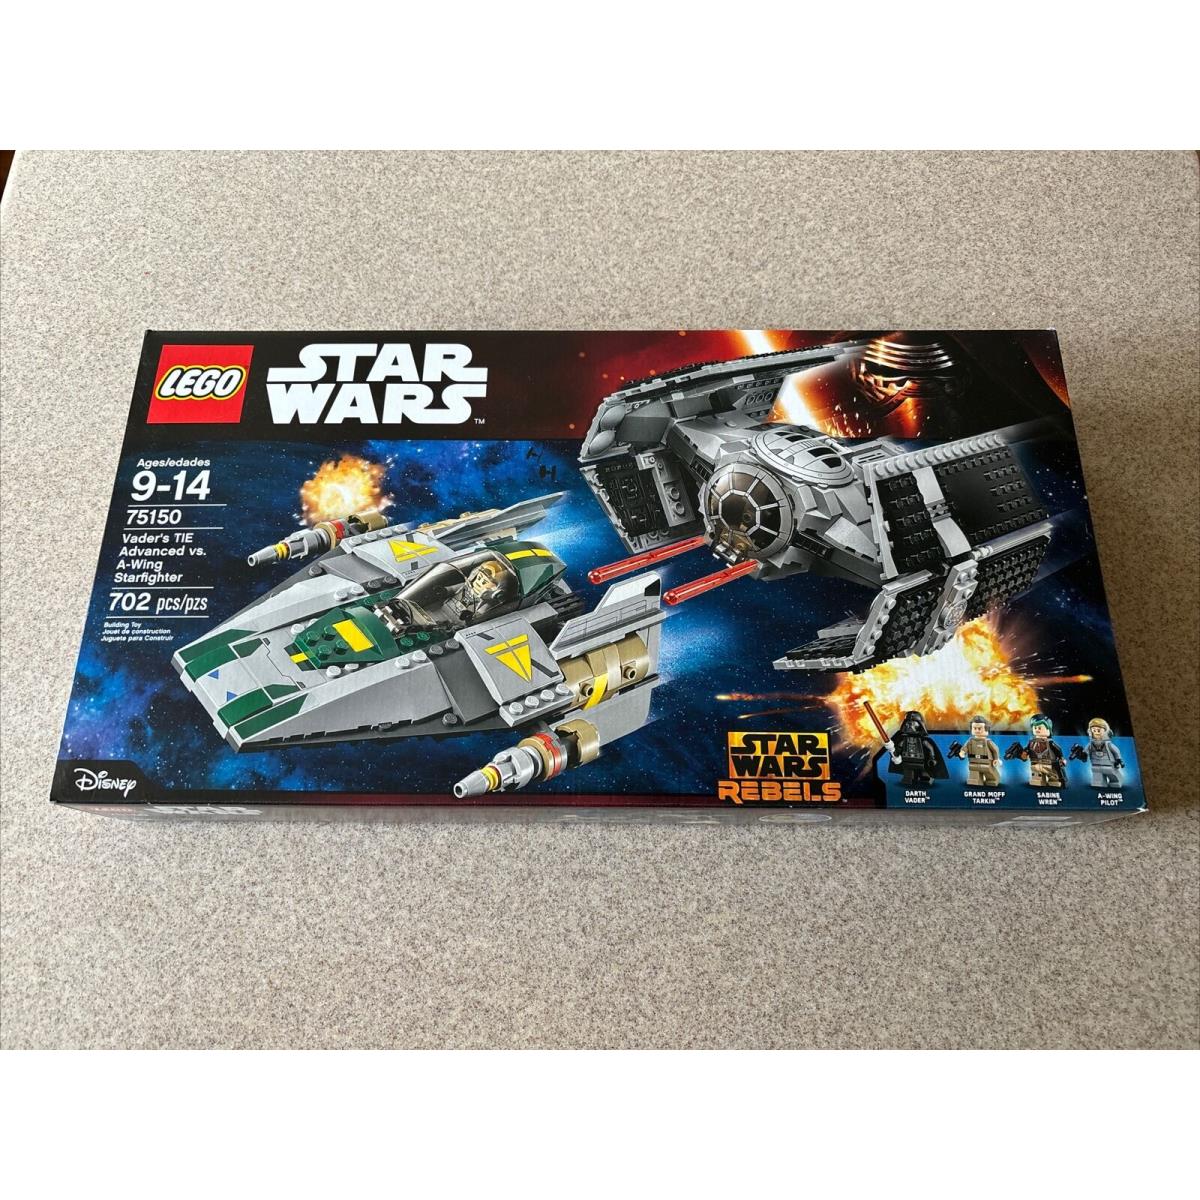 Lego Star Wars: Vader`s Tie Advanced Vs. A-wing Starfighter 75150 Retired